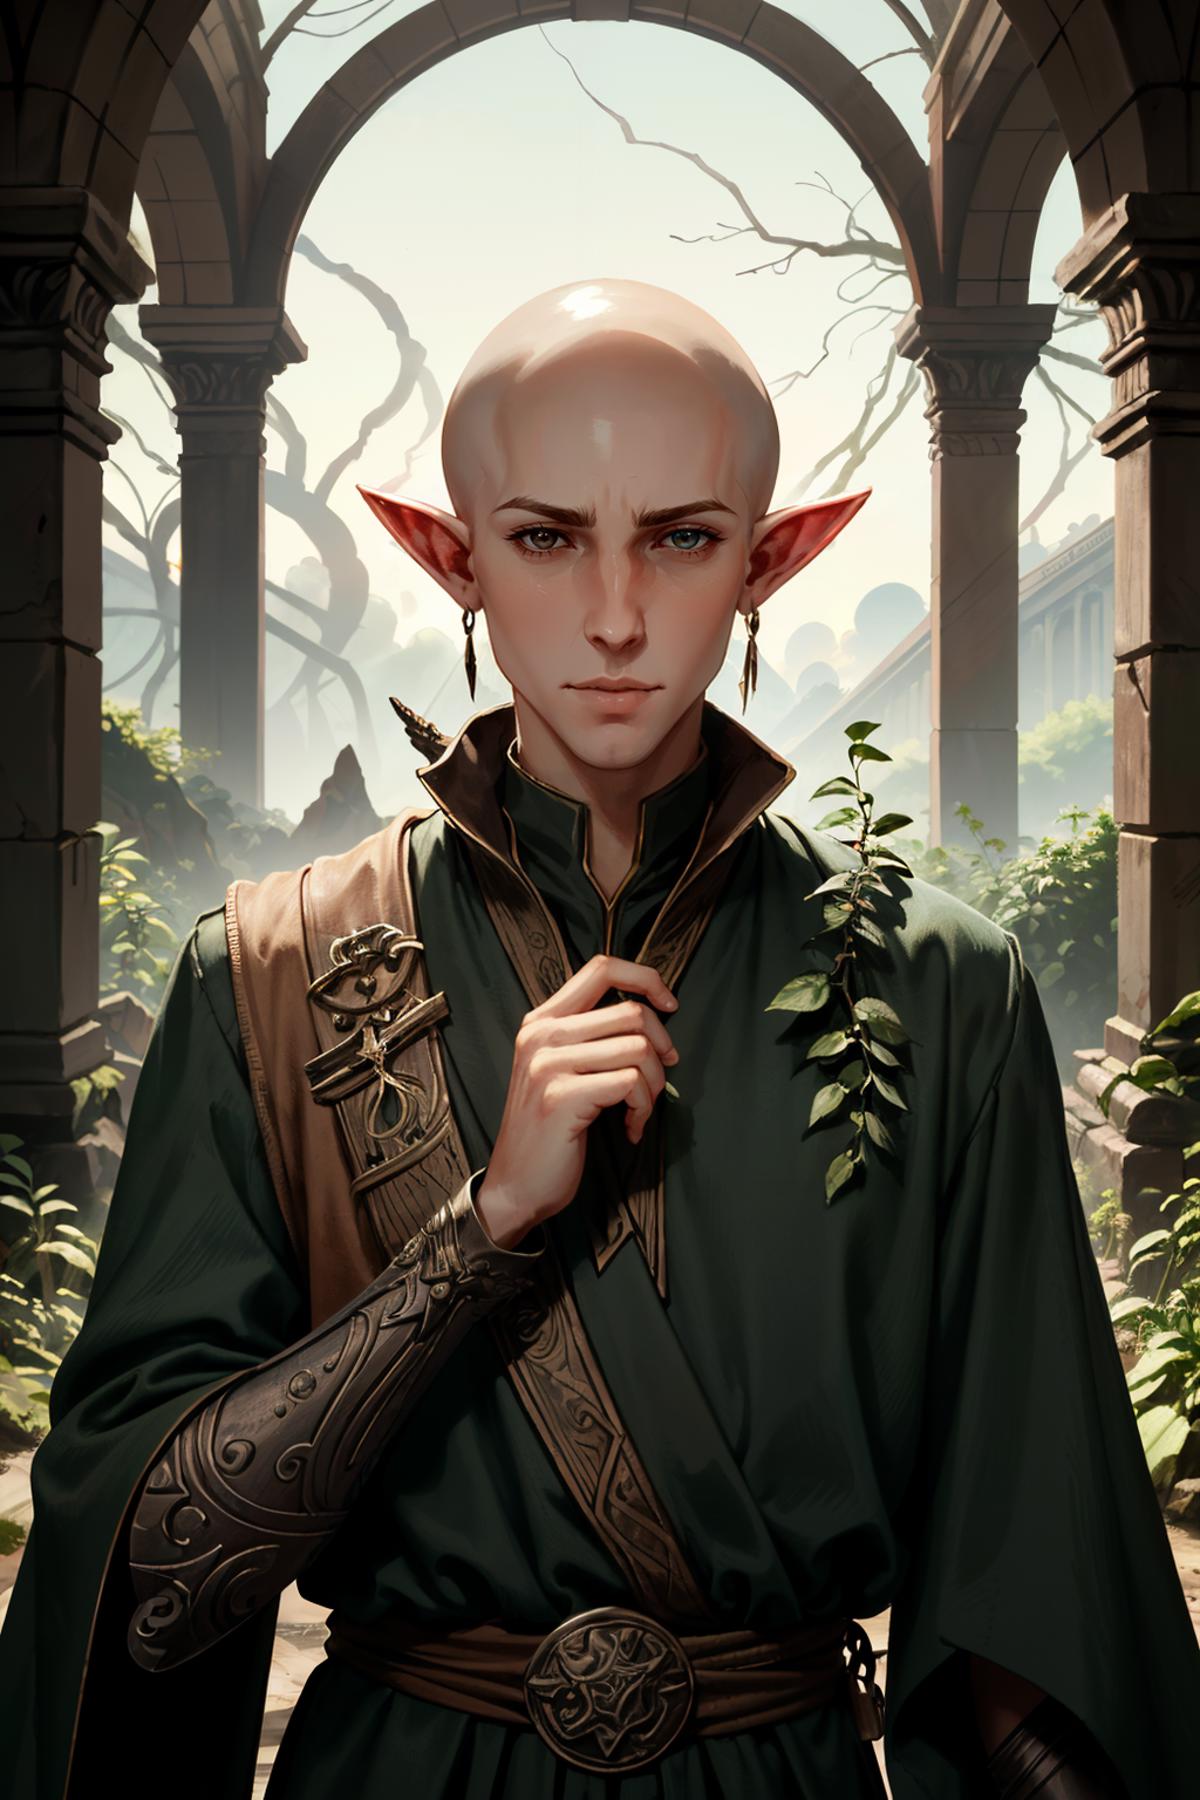 Solas from Dragon Age: Inquisition image by BloodRedKittie